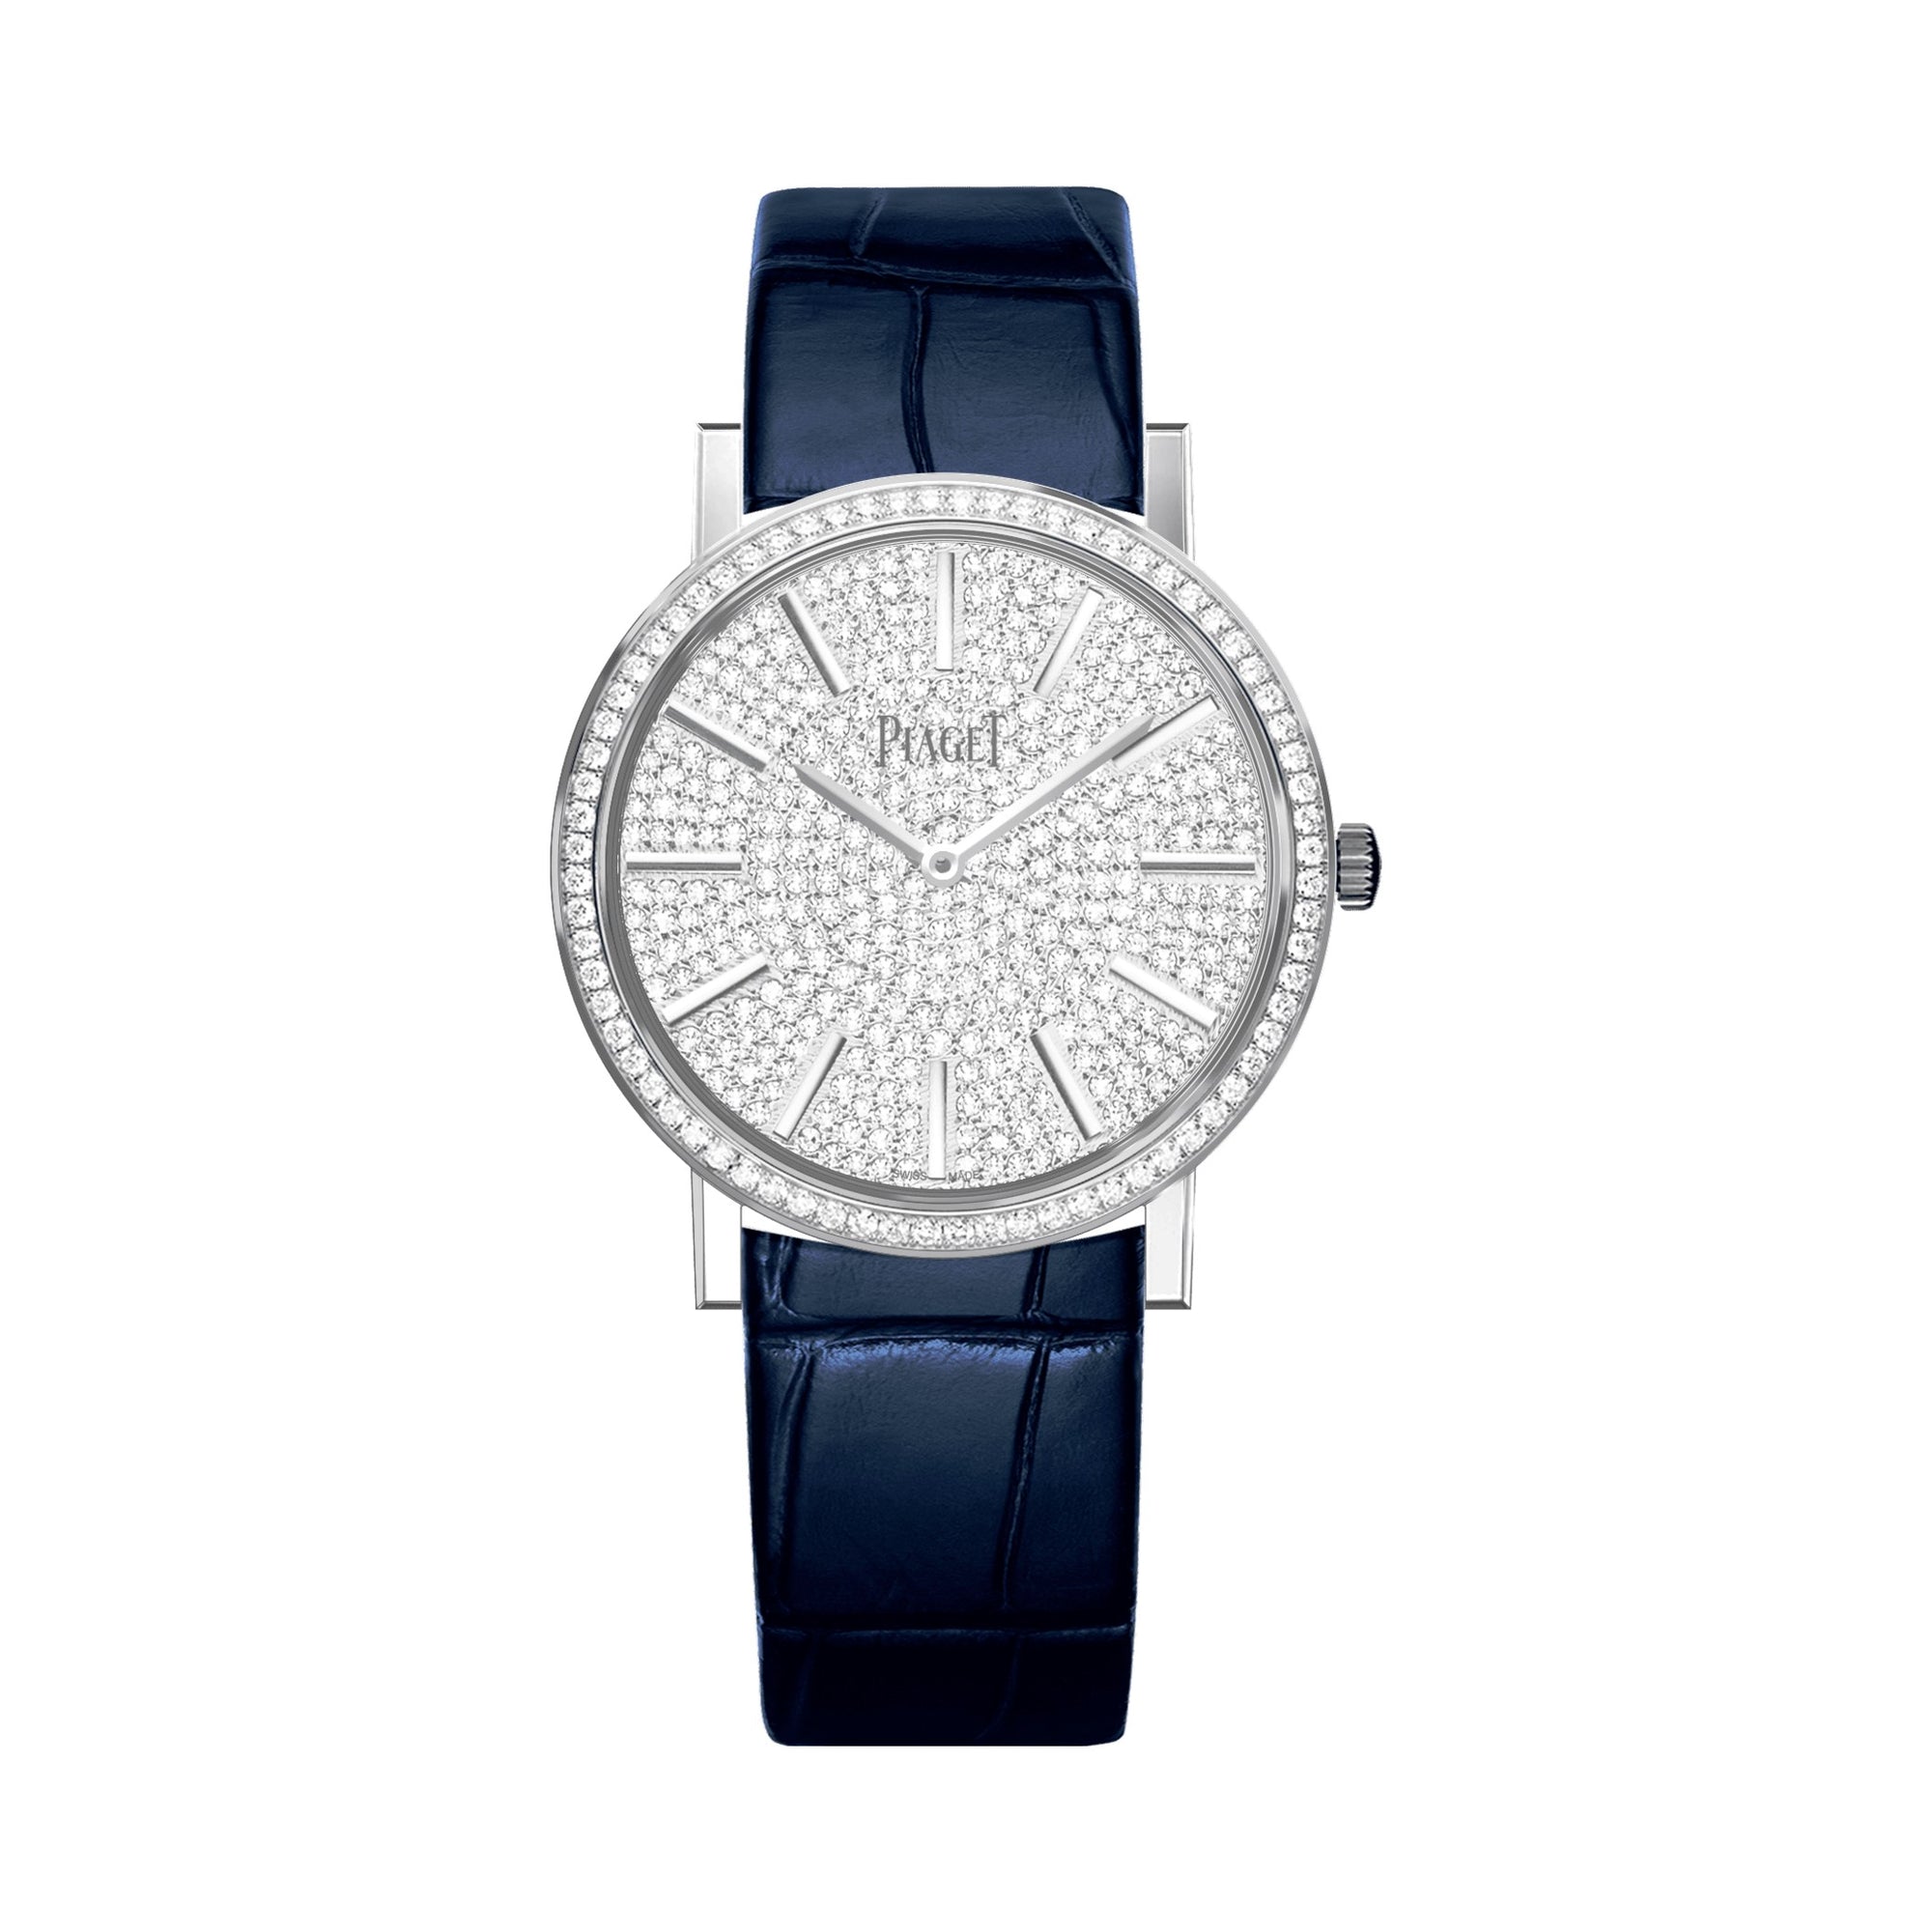 Altiplano watch, 35 mm. Case in 18K white gold set with 68 brilliant-cut diamonds (approx. 0.61 ct)